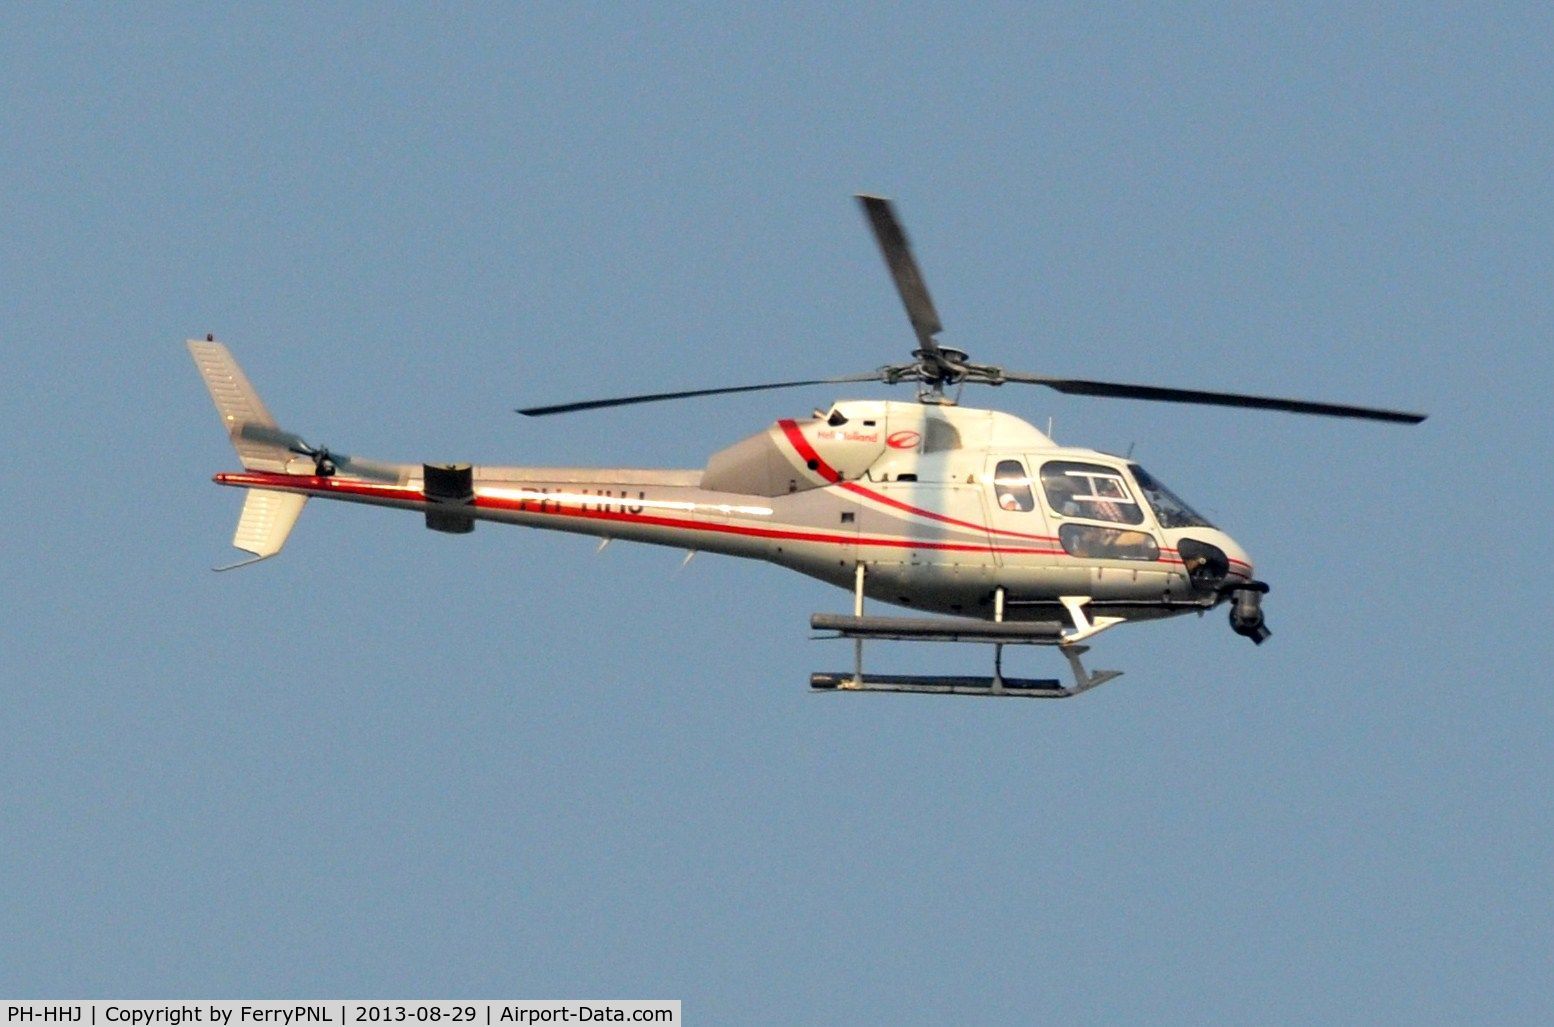 PH-HHJ, Aerospatiale AS-355F-2 Ecureuil 2 C/N 5356, Heli Holland AS355 caught flying over the city of 's-Hertogenbosch, NL.